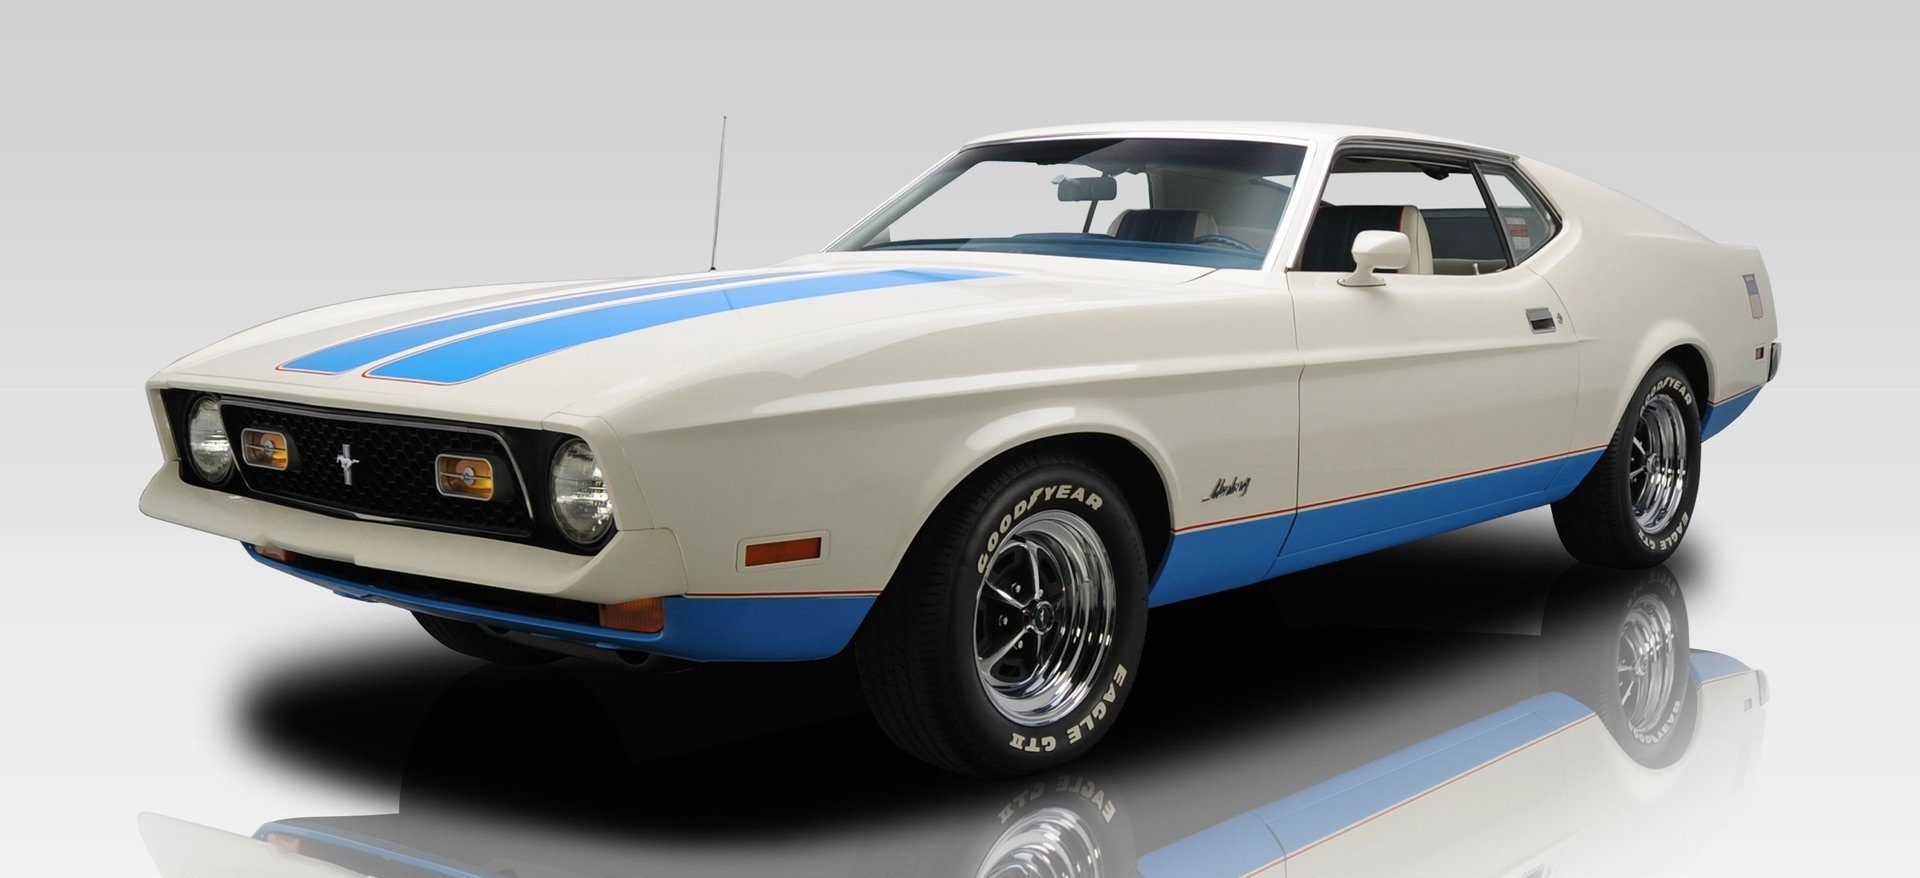 The 1972 Ford Mustang 